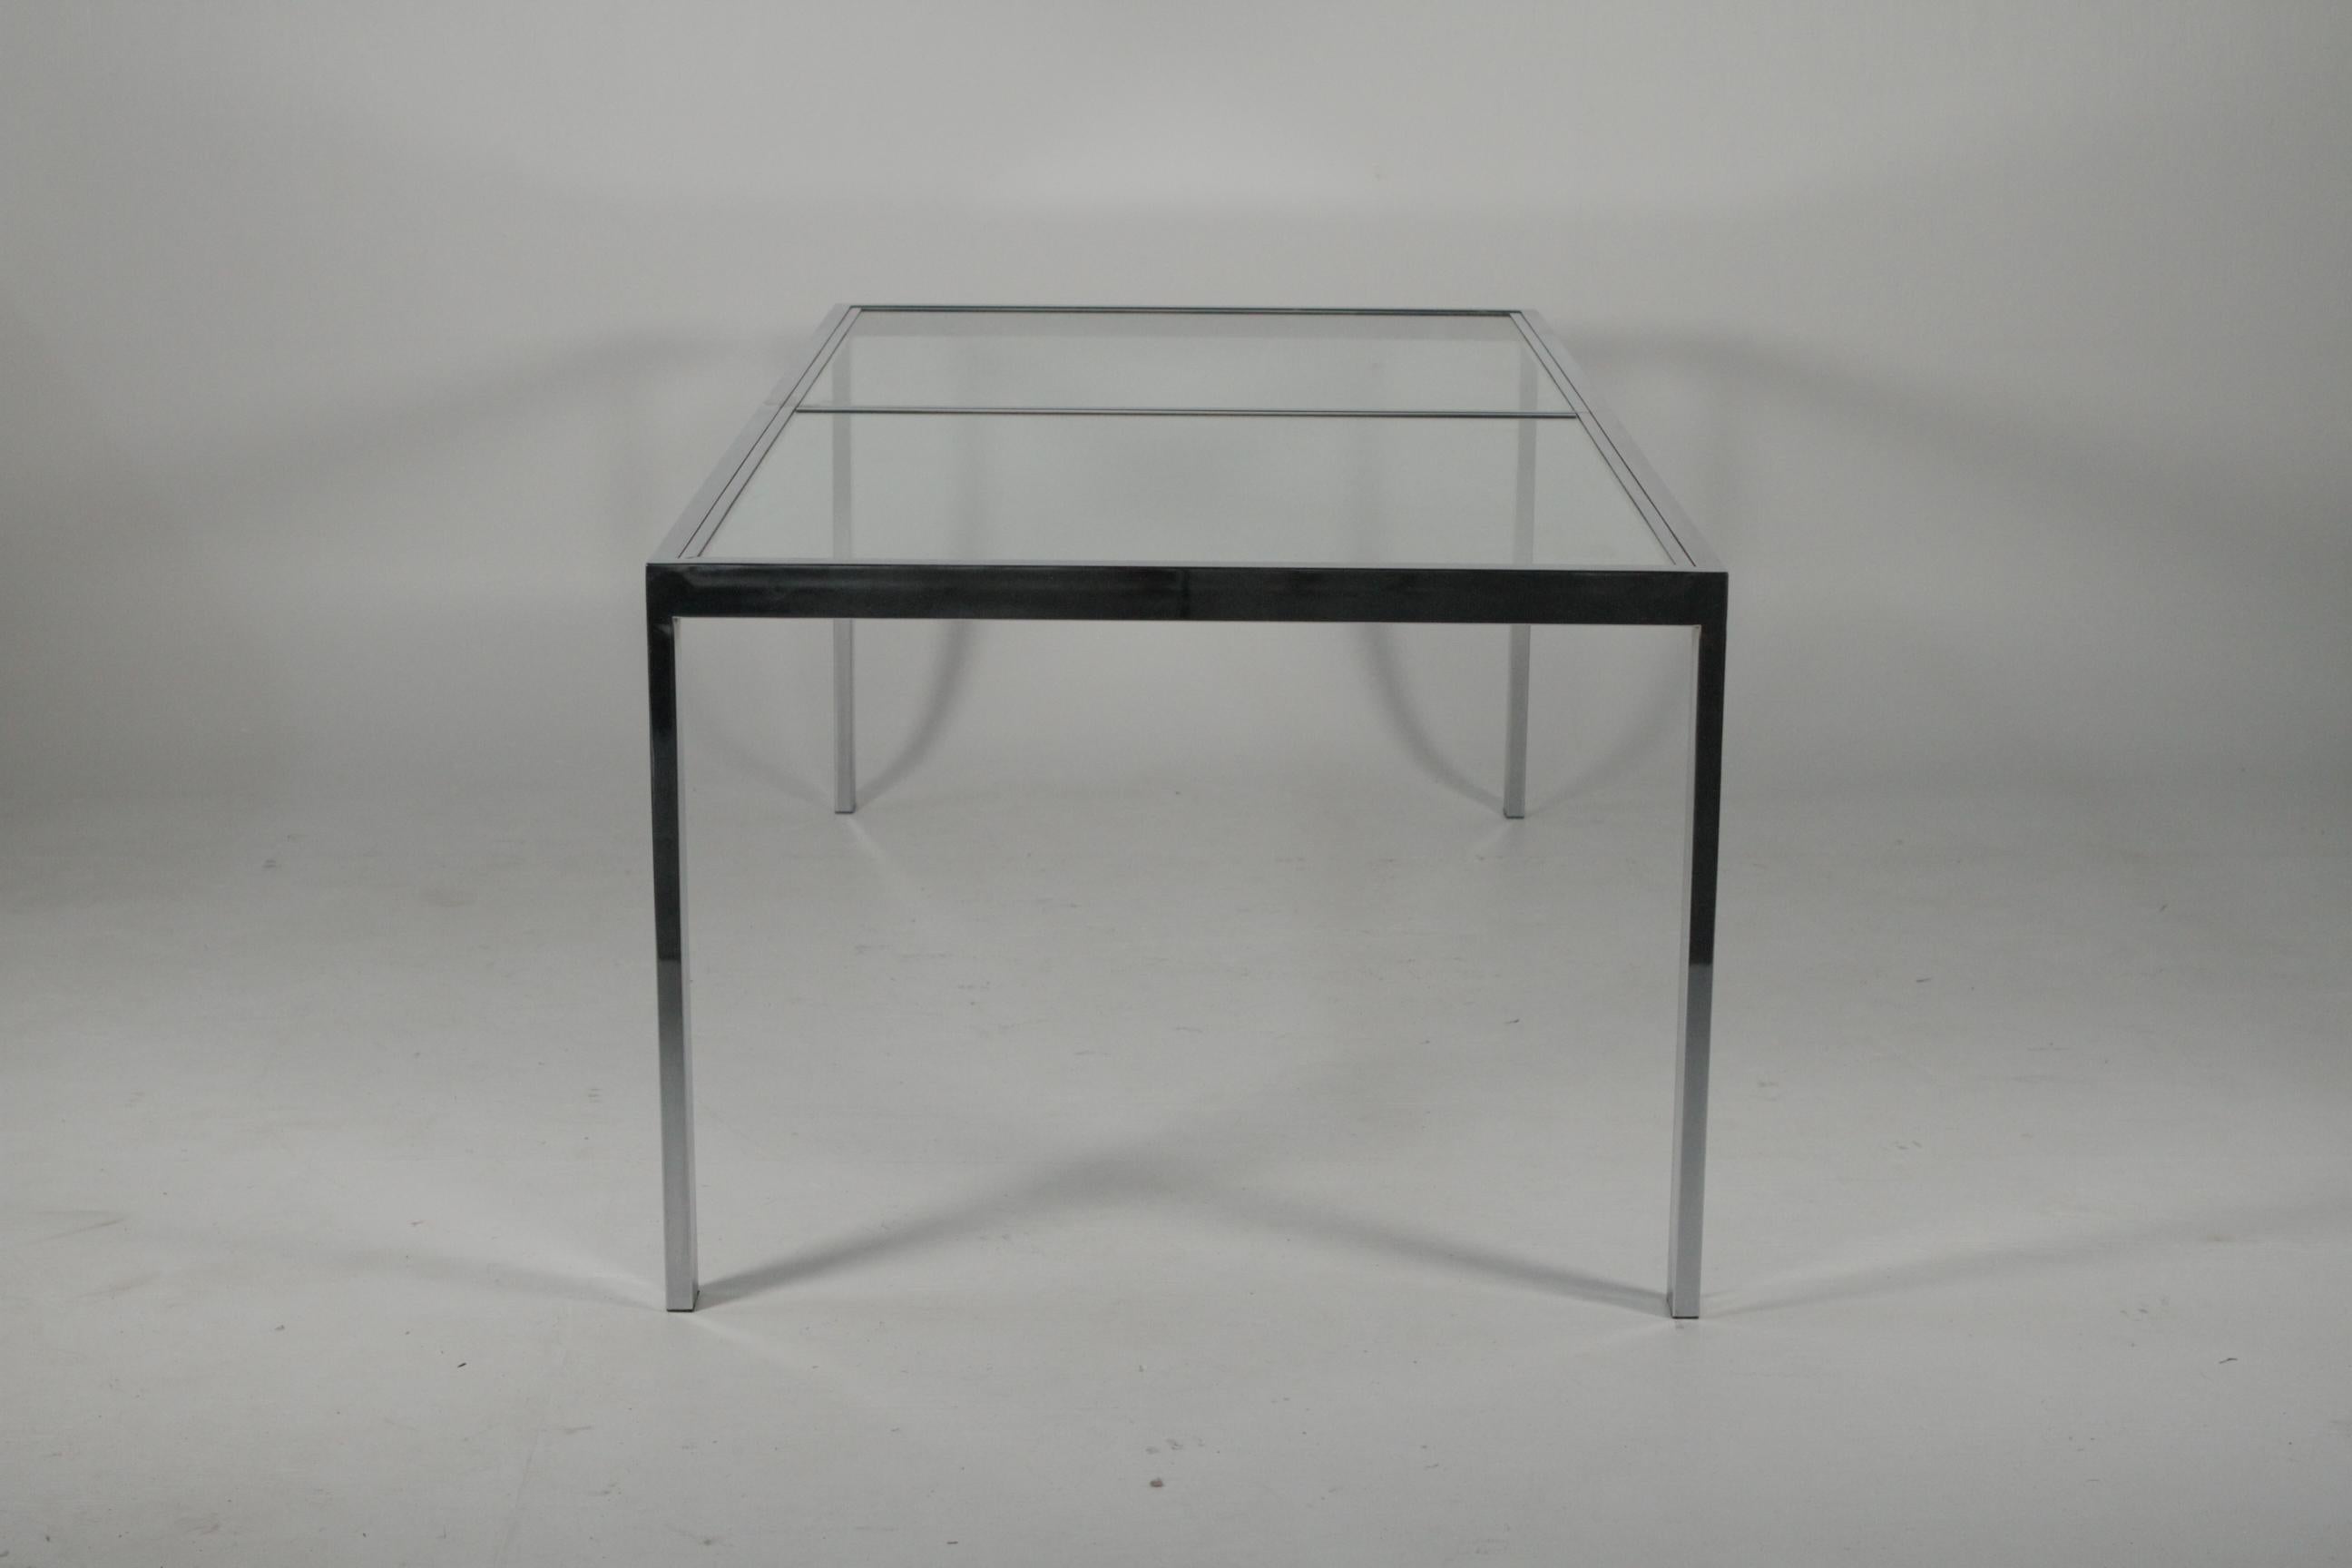 North American DIA Mid-Century Modern Chrome And Glass Top Dining Original Room Table